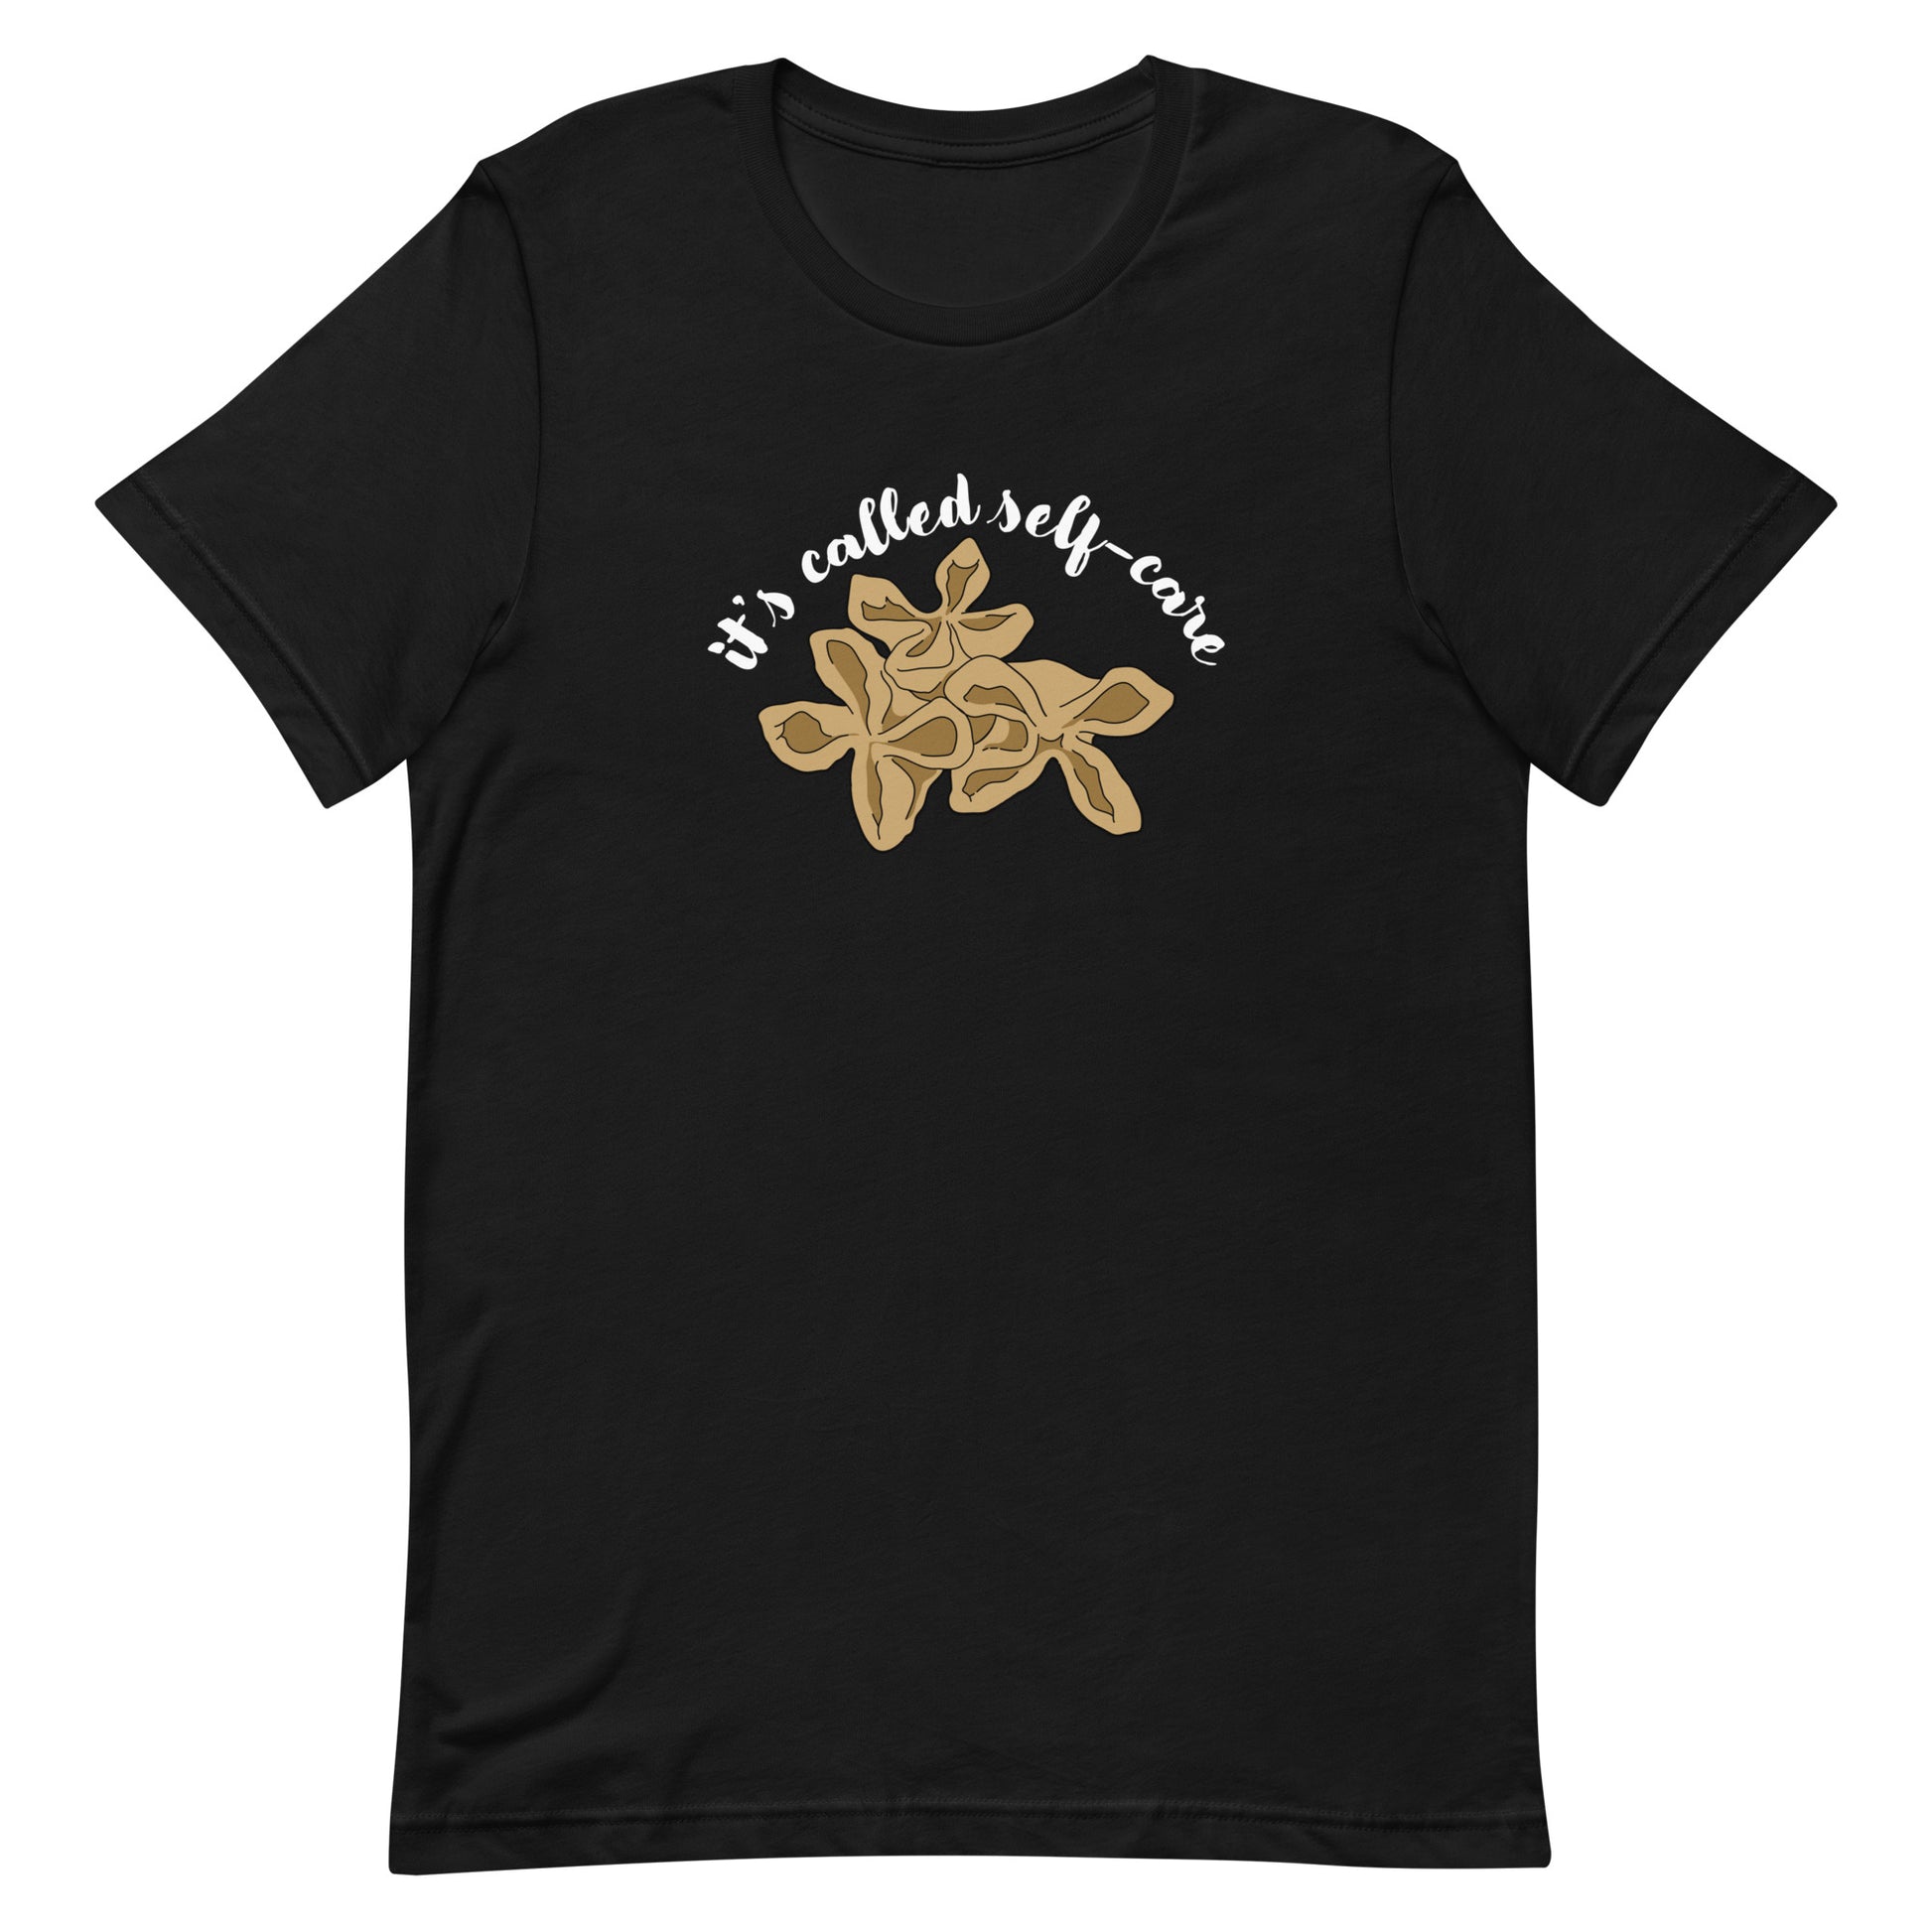 A black crewneck t-shirt featuring an illustration of three pieces of crab rangoon. Text in an arc above the crab rangoon reads "it's called self-care" in a cursive script.